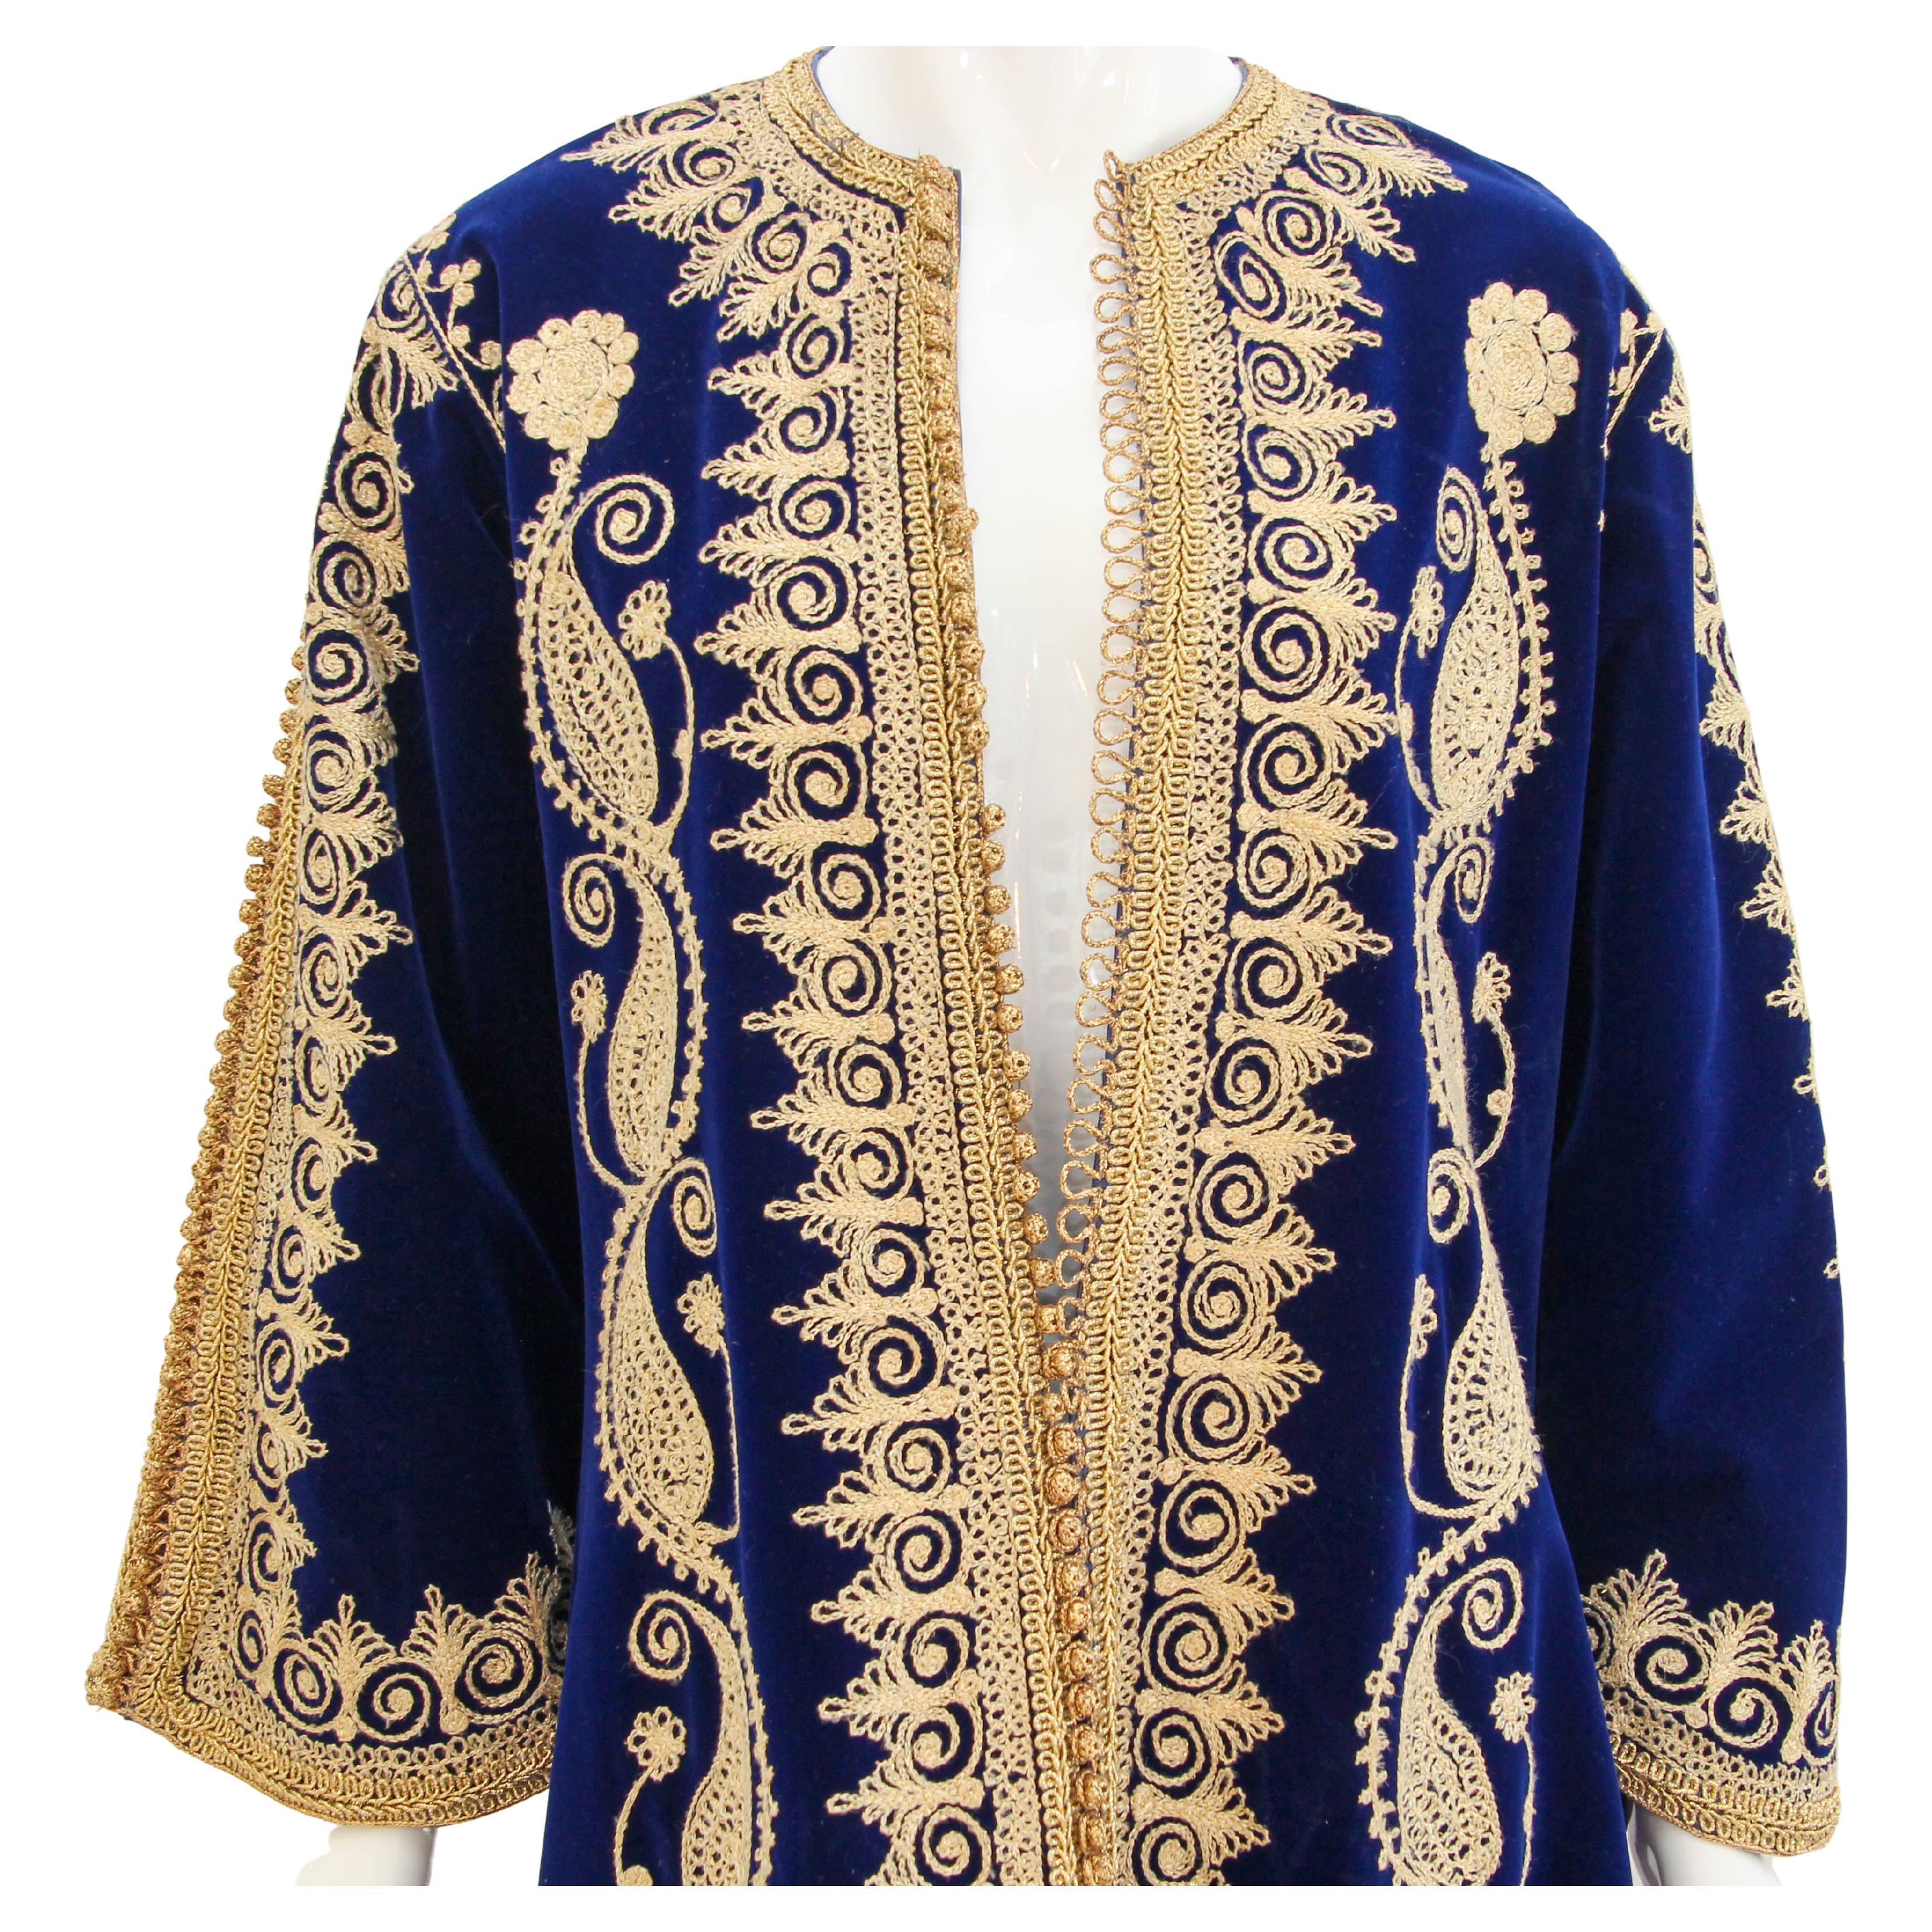 Elegant Moroccan velvet caftan deep midnight blue velvet embroidered with gold metallic threads,
circa 1960s.
This long maxi dress velvet caftan is embroidered and embellished entirely by hand.
One of a kind evening Moroccan Middle Eastern gown.
The